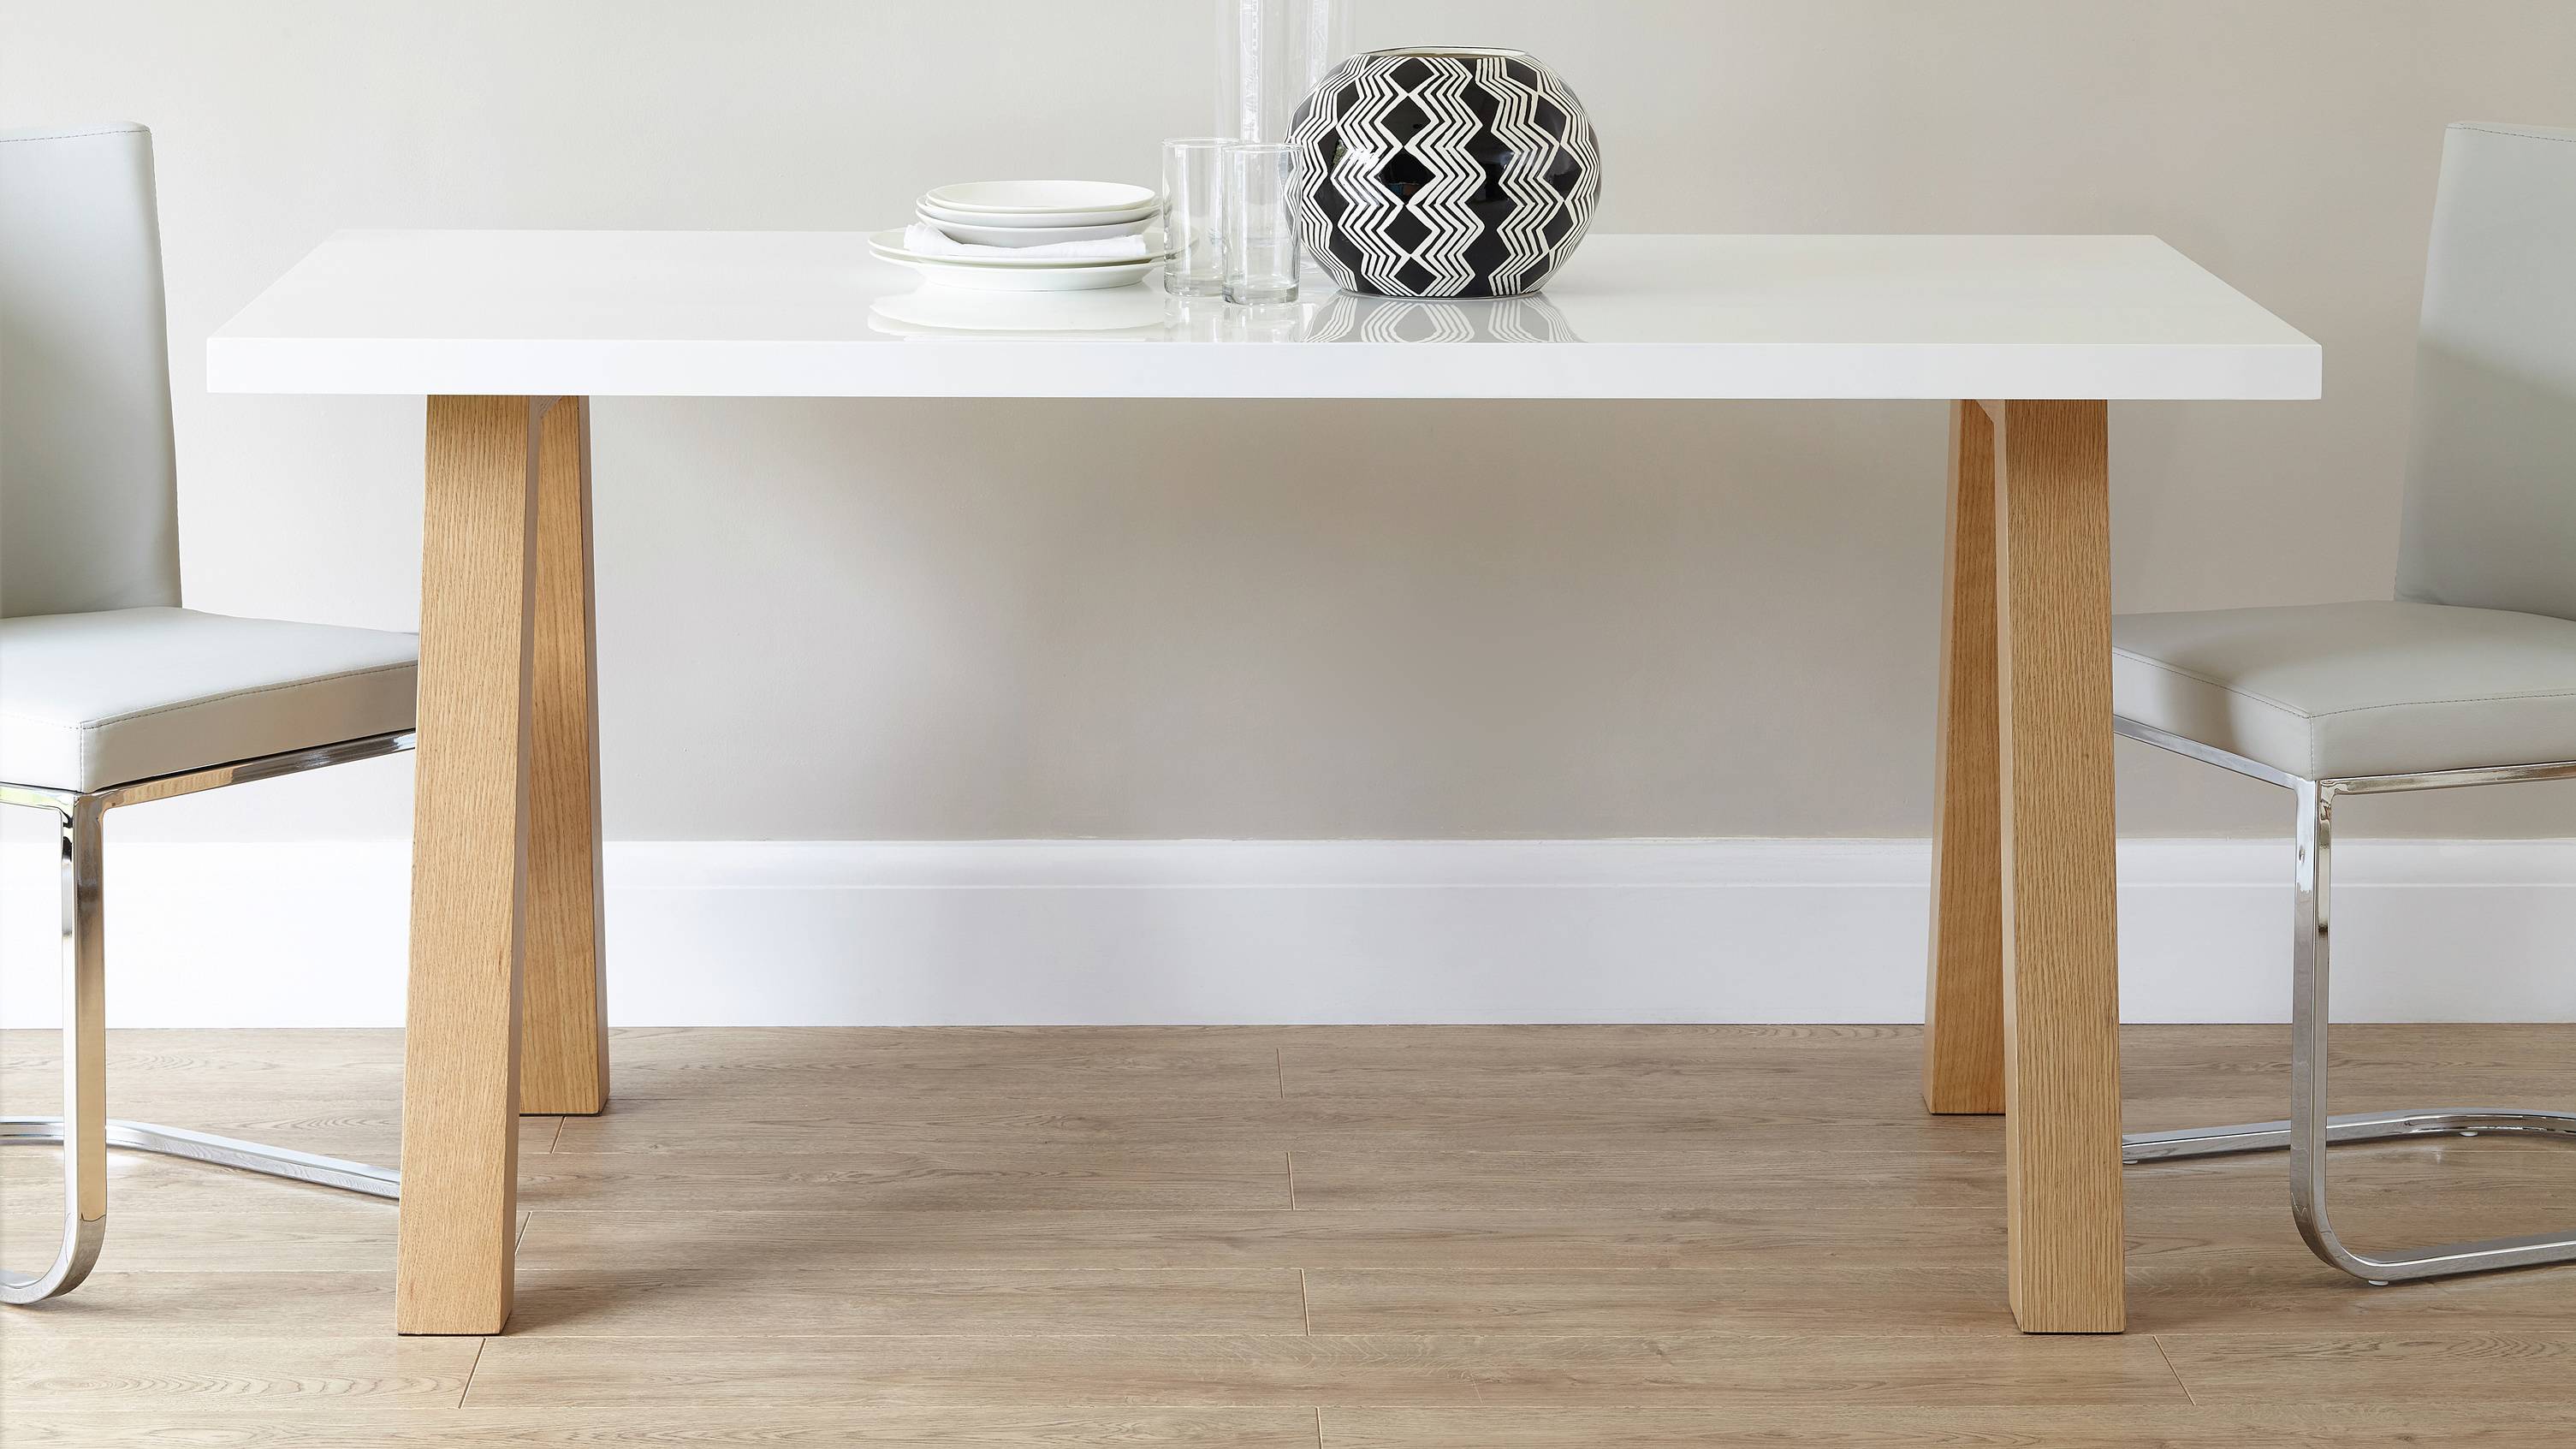 Oak and white gloss 6 seater dining table Exclusively Danetti with Julia Kendell range